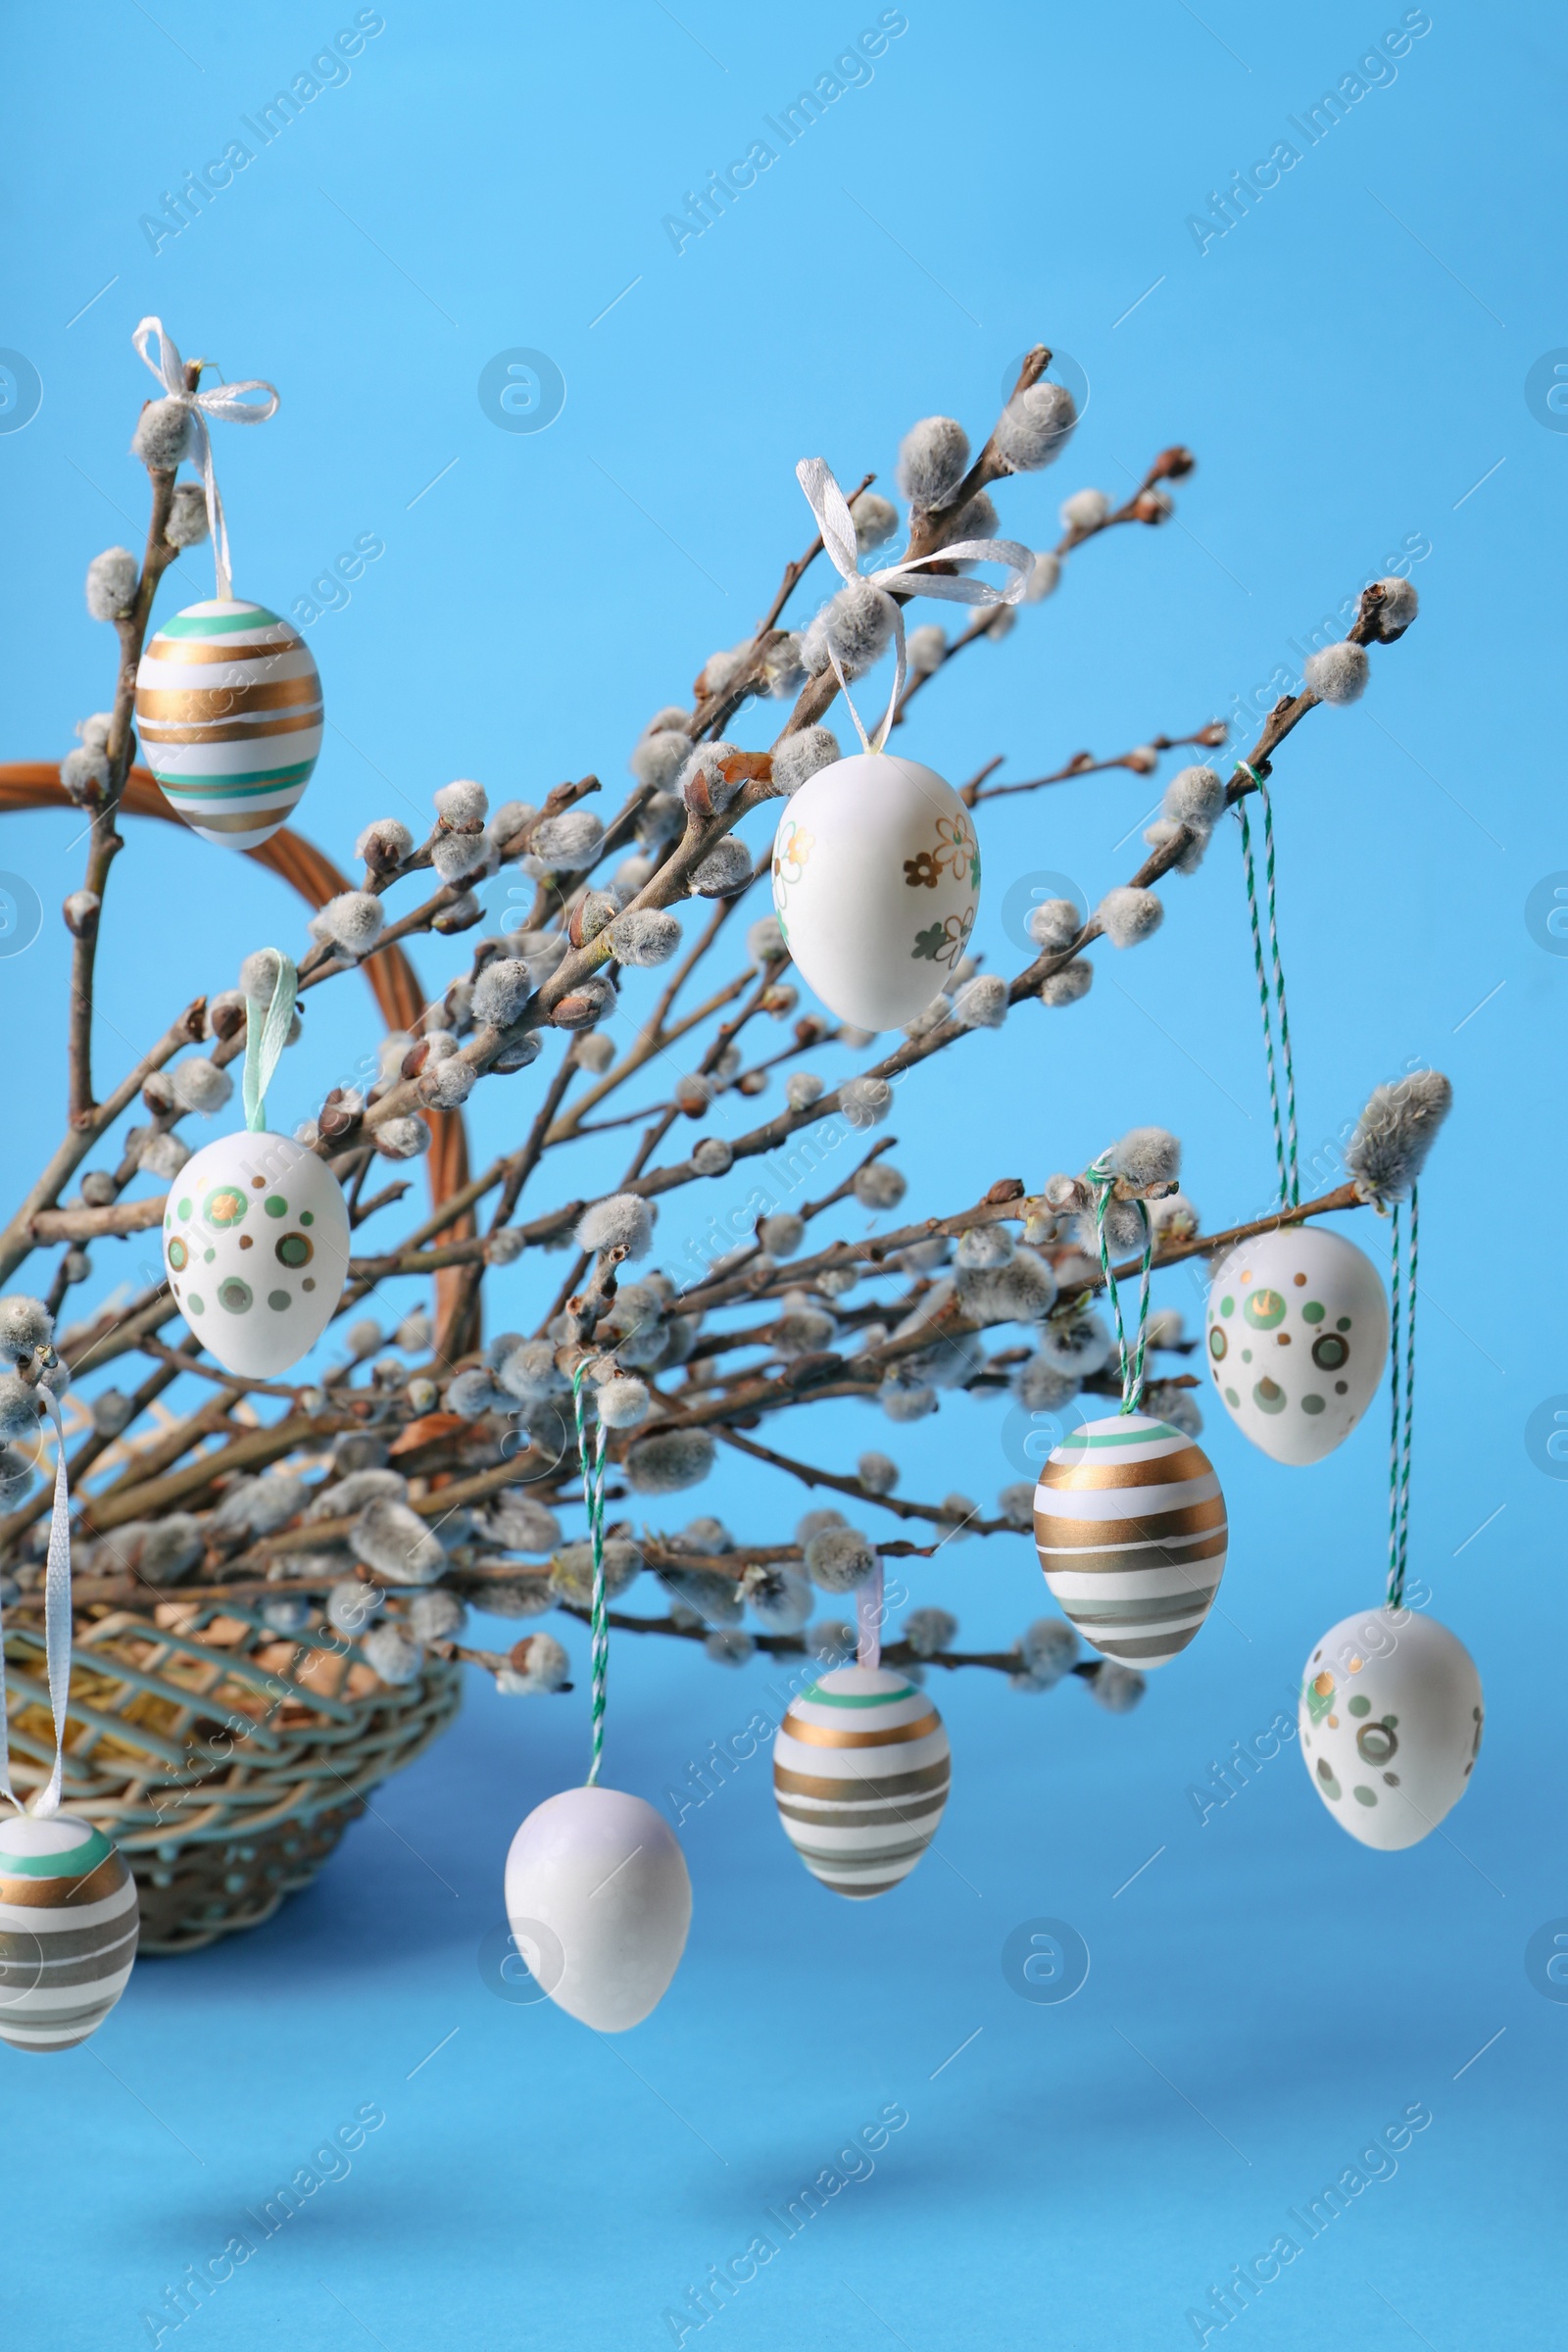 Photo of Wicker basket with beautiful willow branches and painted eggs on light blue background, closeup. Easter decor